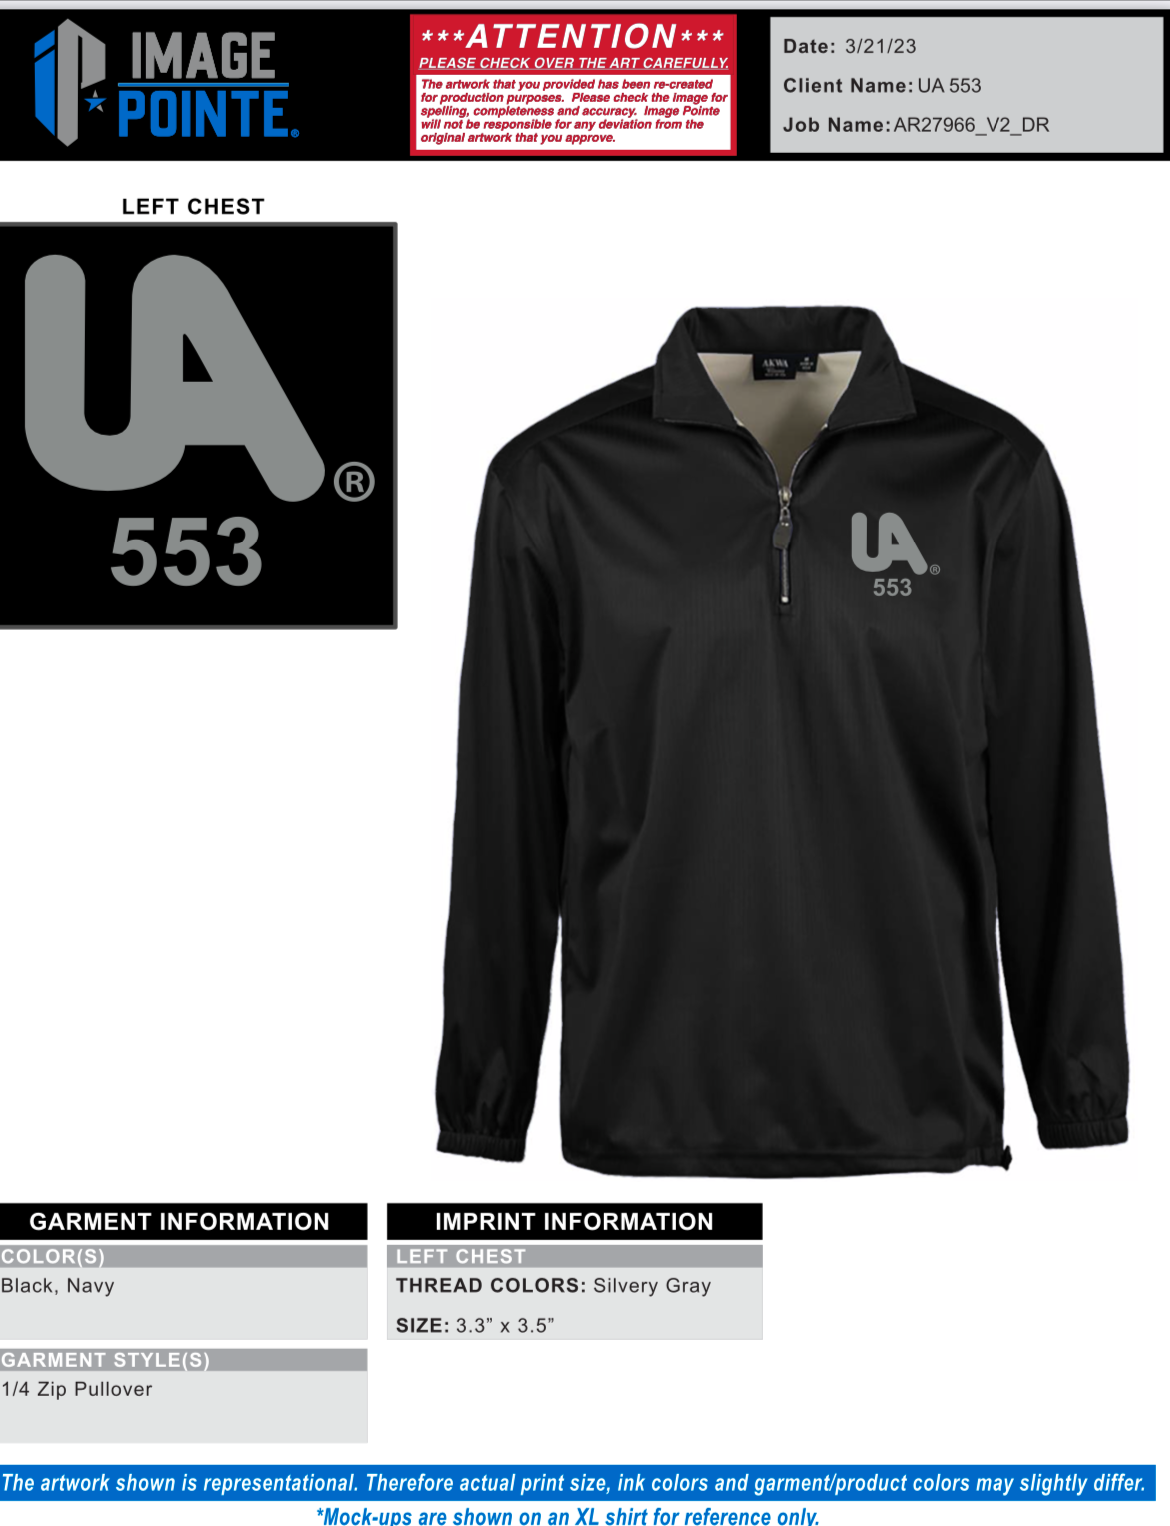 https://ualocal553.org/wp-content/uploads/2023/04/WINDSHIRT1.png